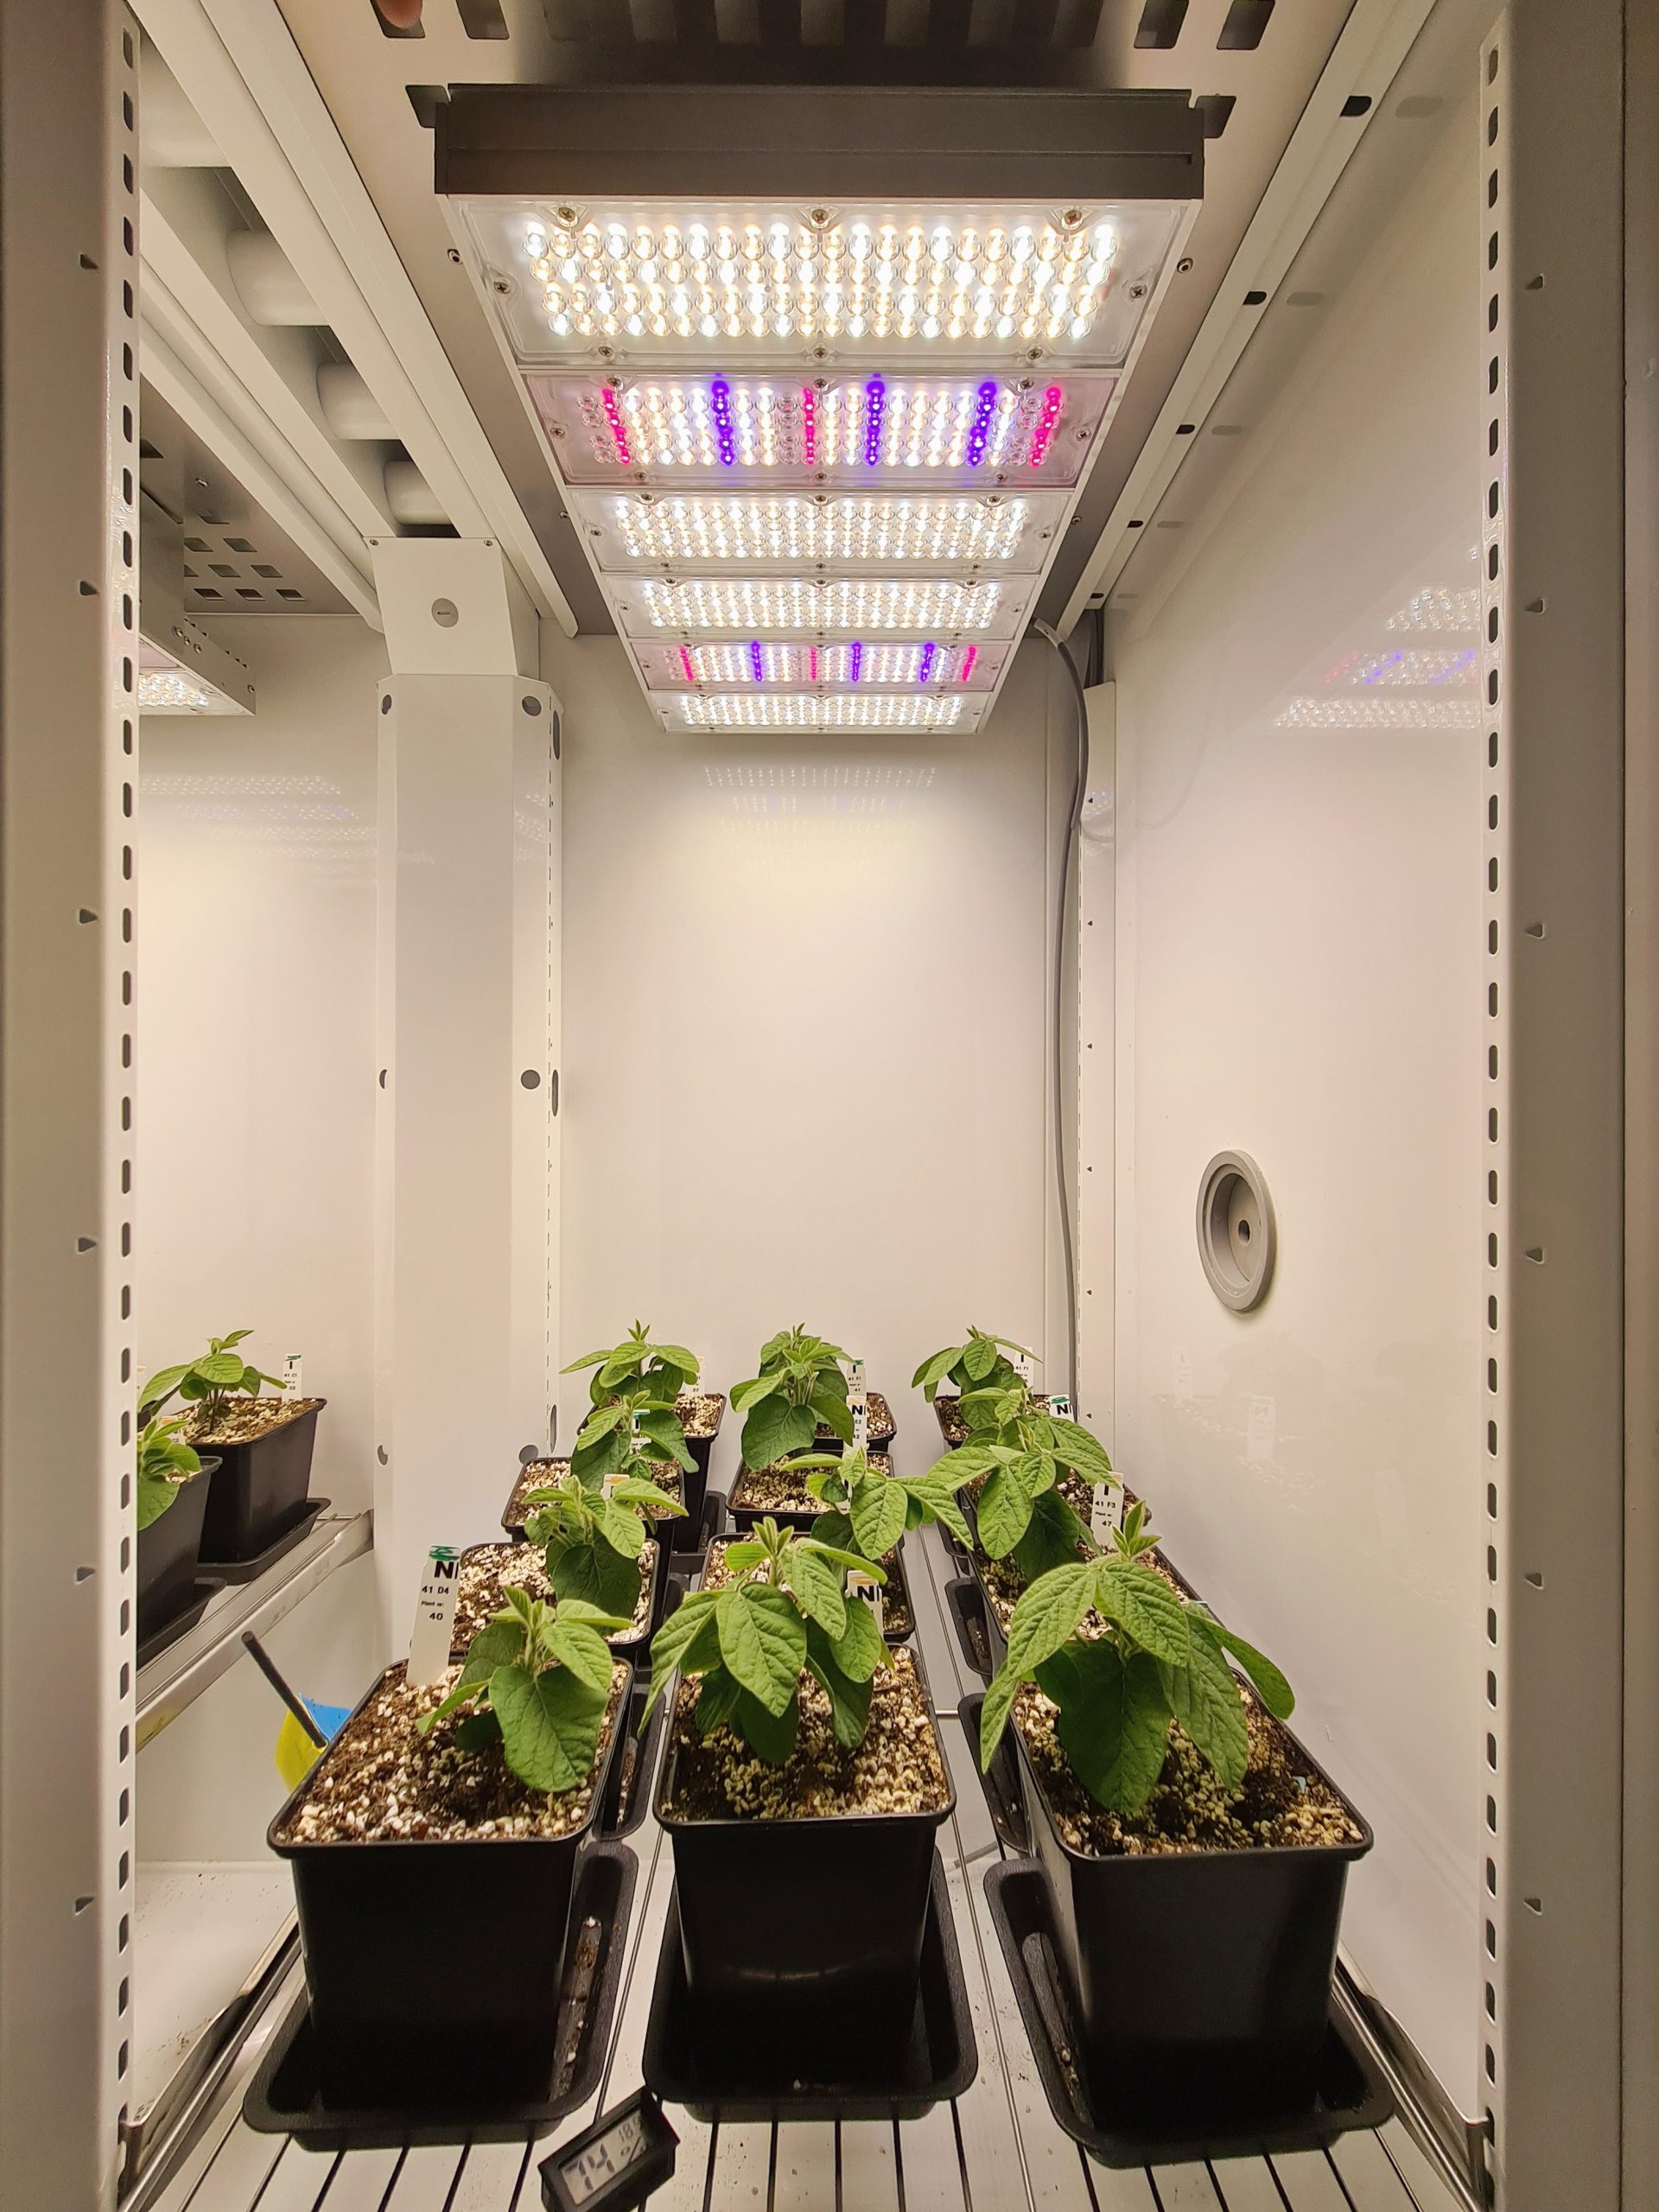 Aralab Soy growth chamber